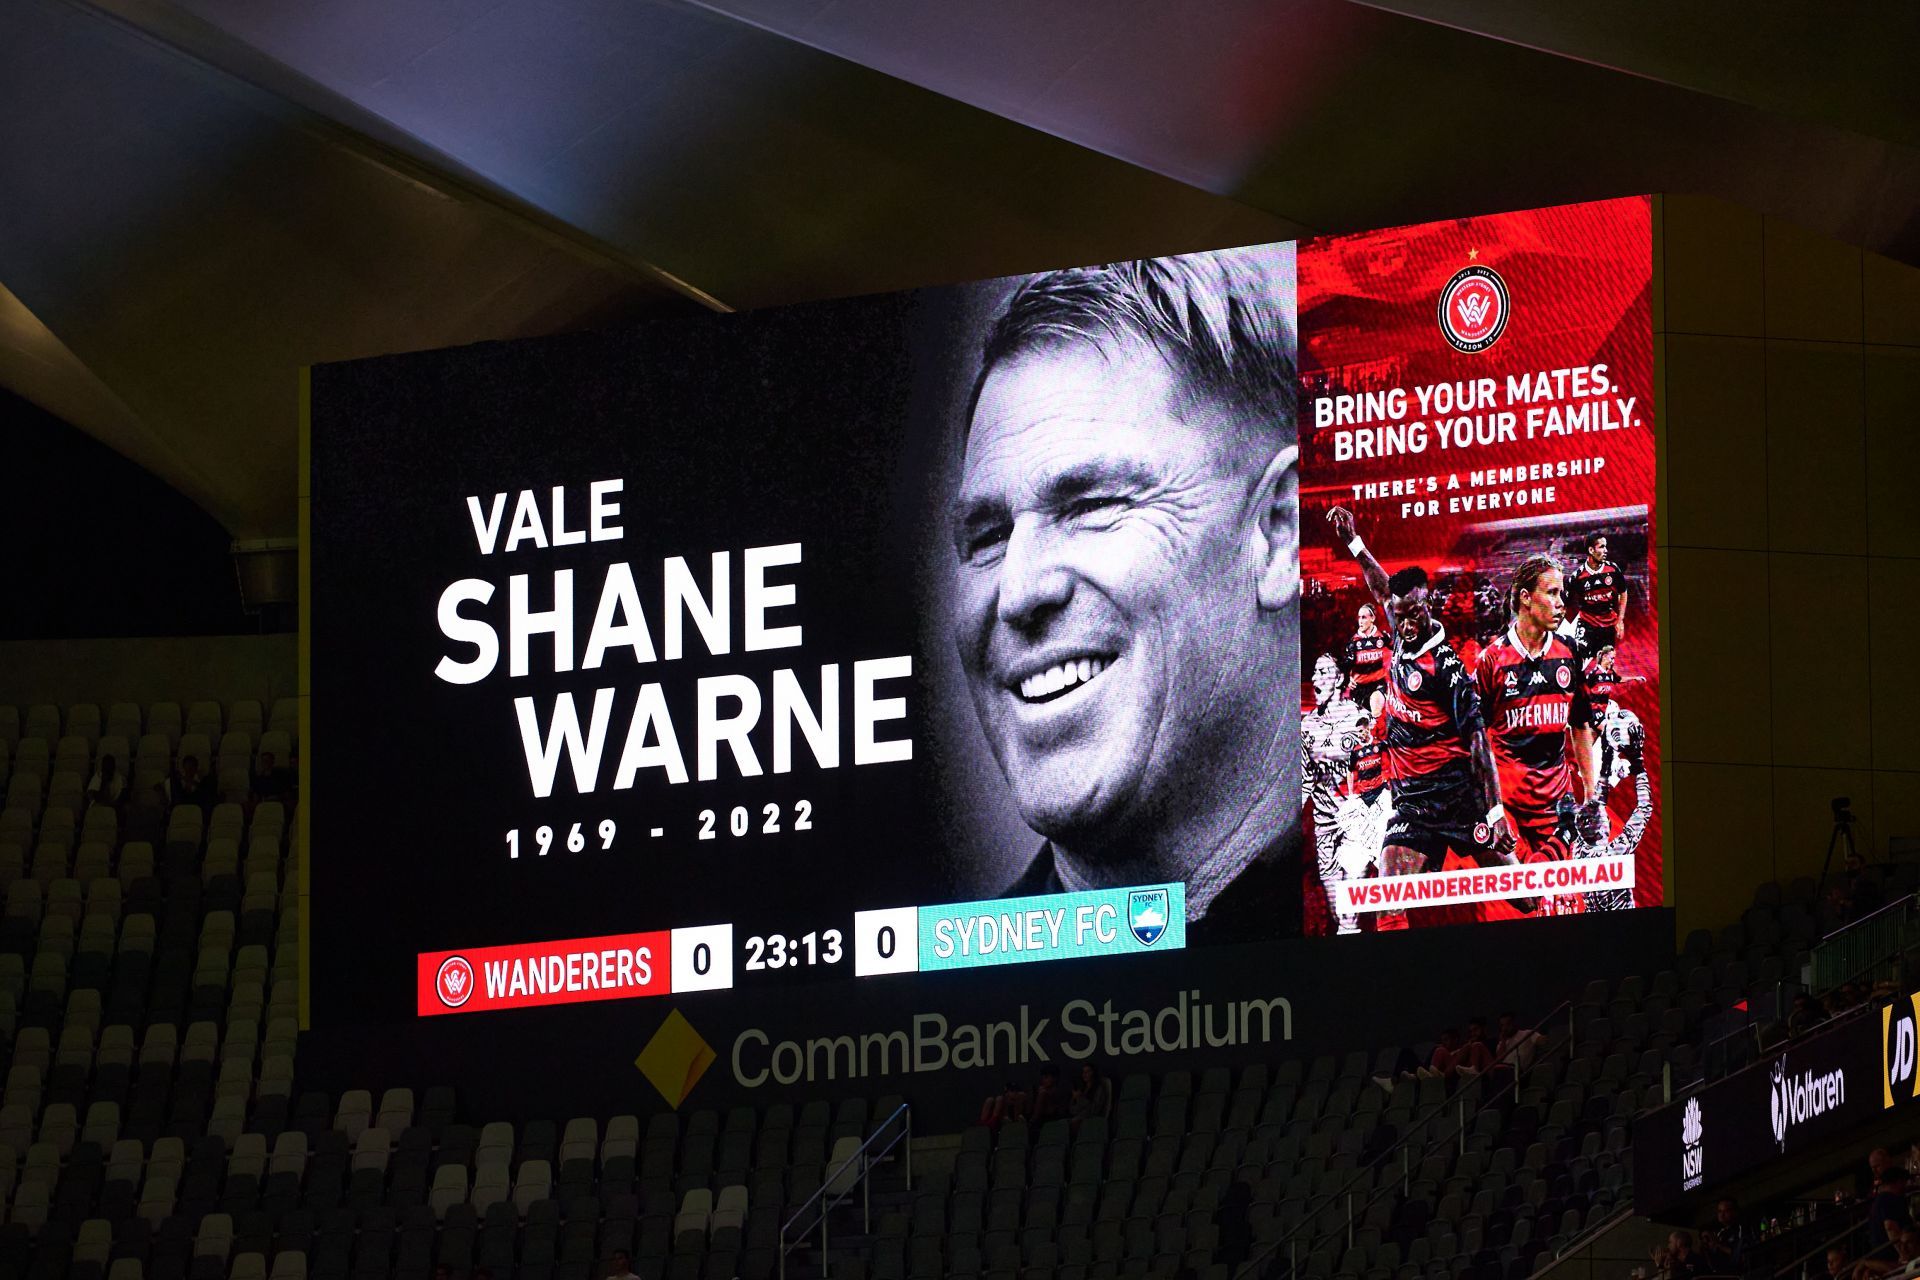 Shane Warne will live in our memories forever.